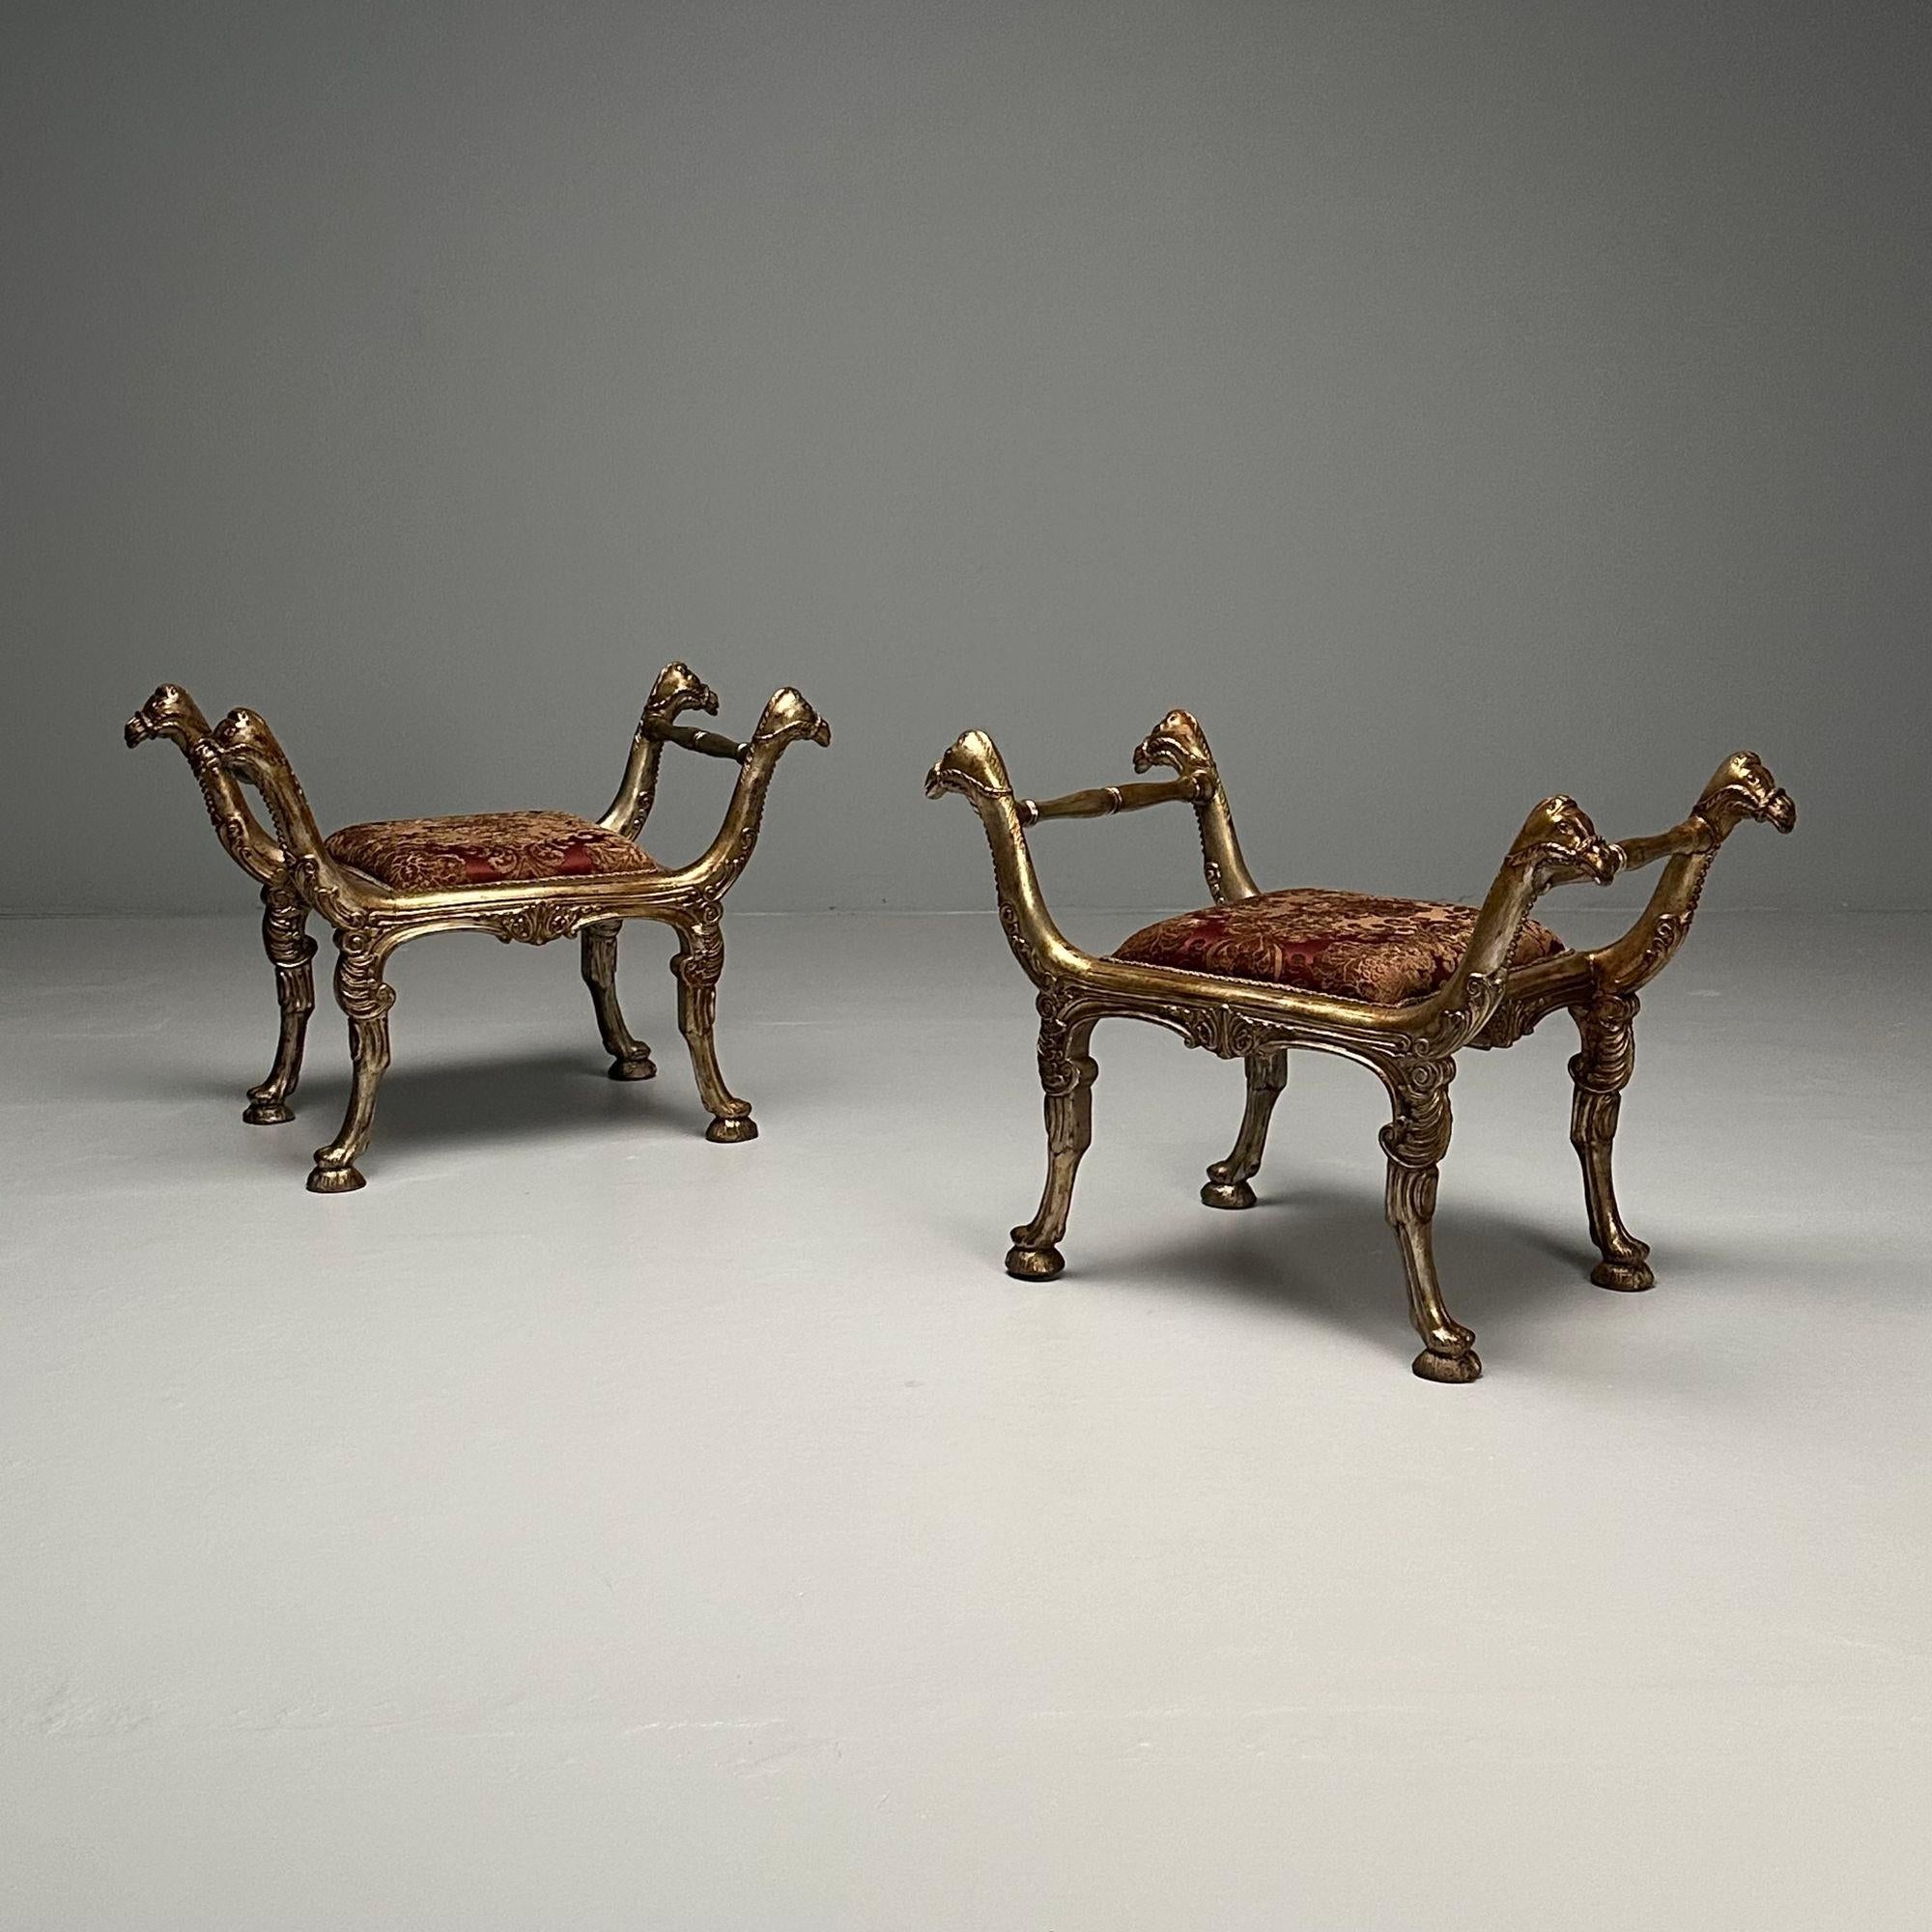 Pair of Italian Neoclassical-Style Carved and Silvered Giltwood Curule Benches

Details of note include a silvered gilt gold finish over red clay base, acanthus arms with camel head terminals, richly upholstered seats, out-swept legs and hoof feet.